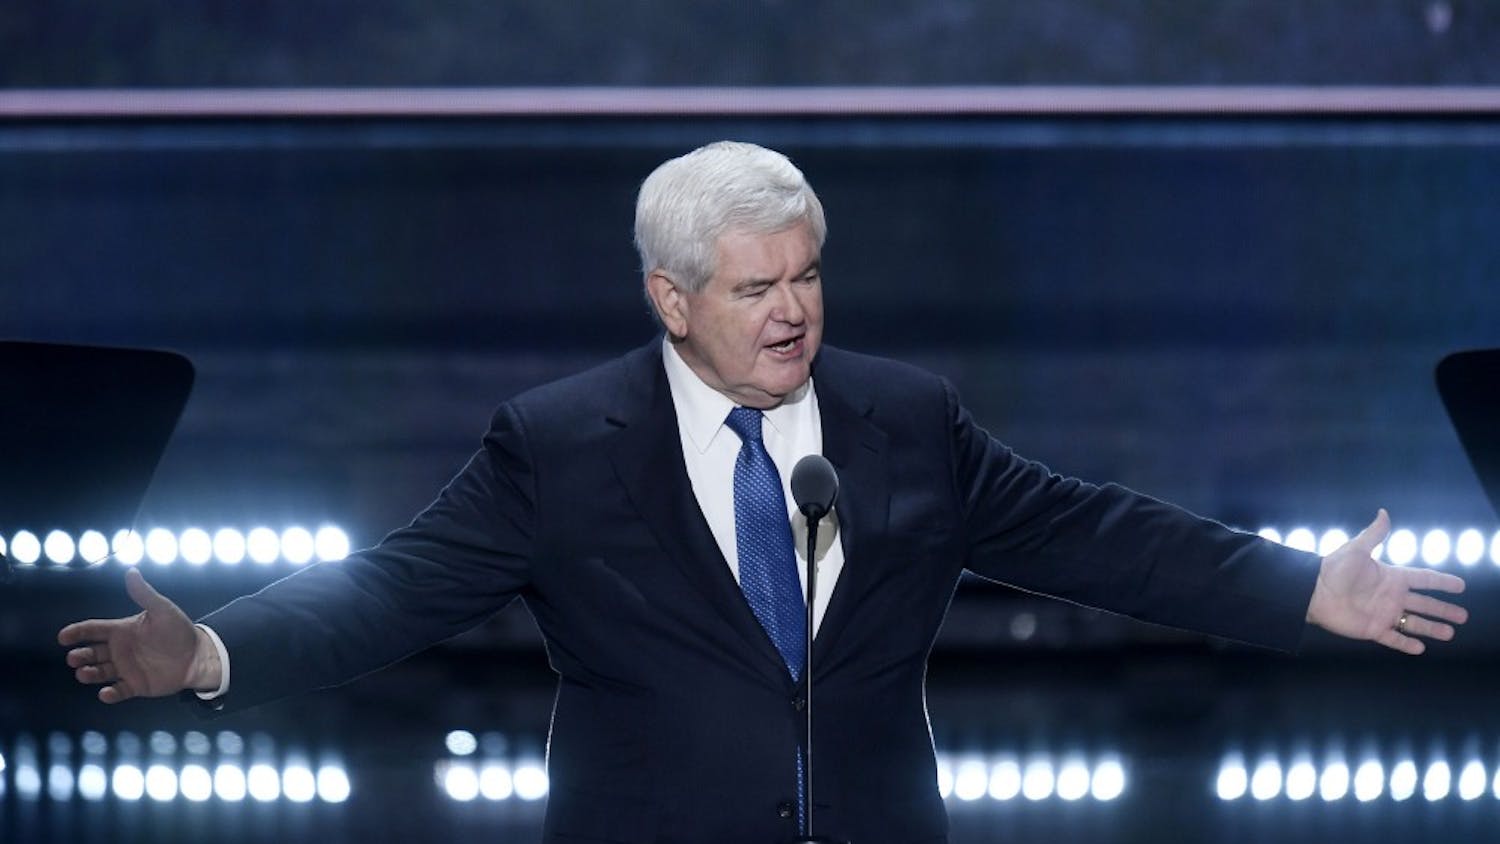 Former House Speaker Newt Gingrich speaks on the third day of the Republican National Convention at Quicken Loans Arena in Cleveland on Wednesday, July 20, 2016. (Olivier Douliery/Abaca Press/TNS)